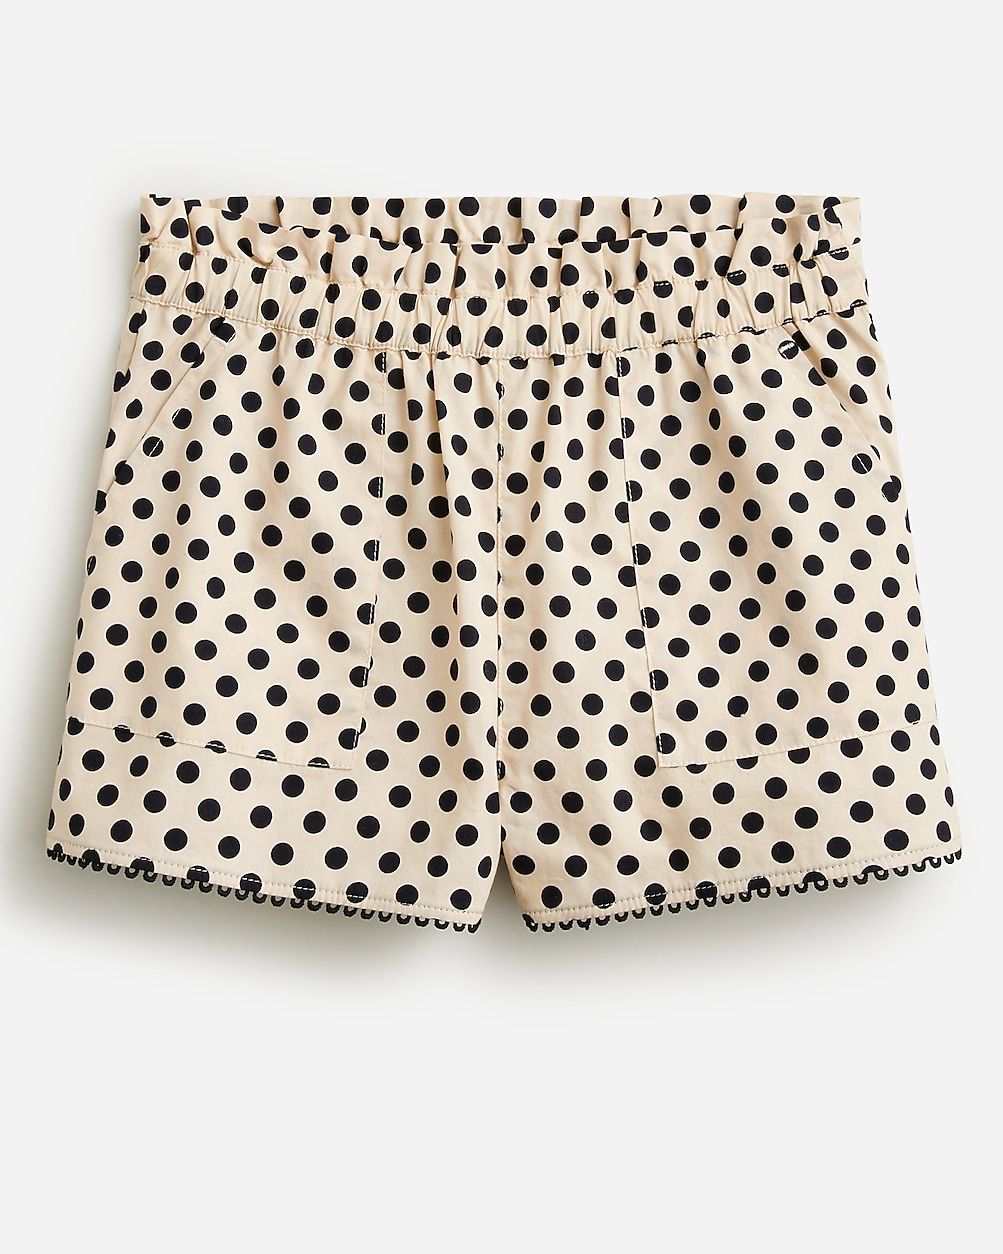 How to wear ittop rated5.0(11 REVIEWS)Girls' fresco short in cotton poplin dot$22.50-$29.50$45.00... | J.Crew US